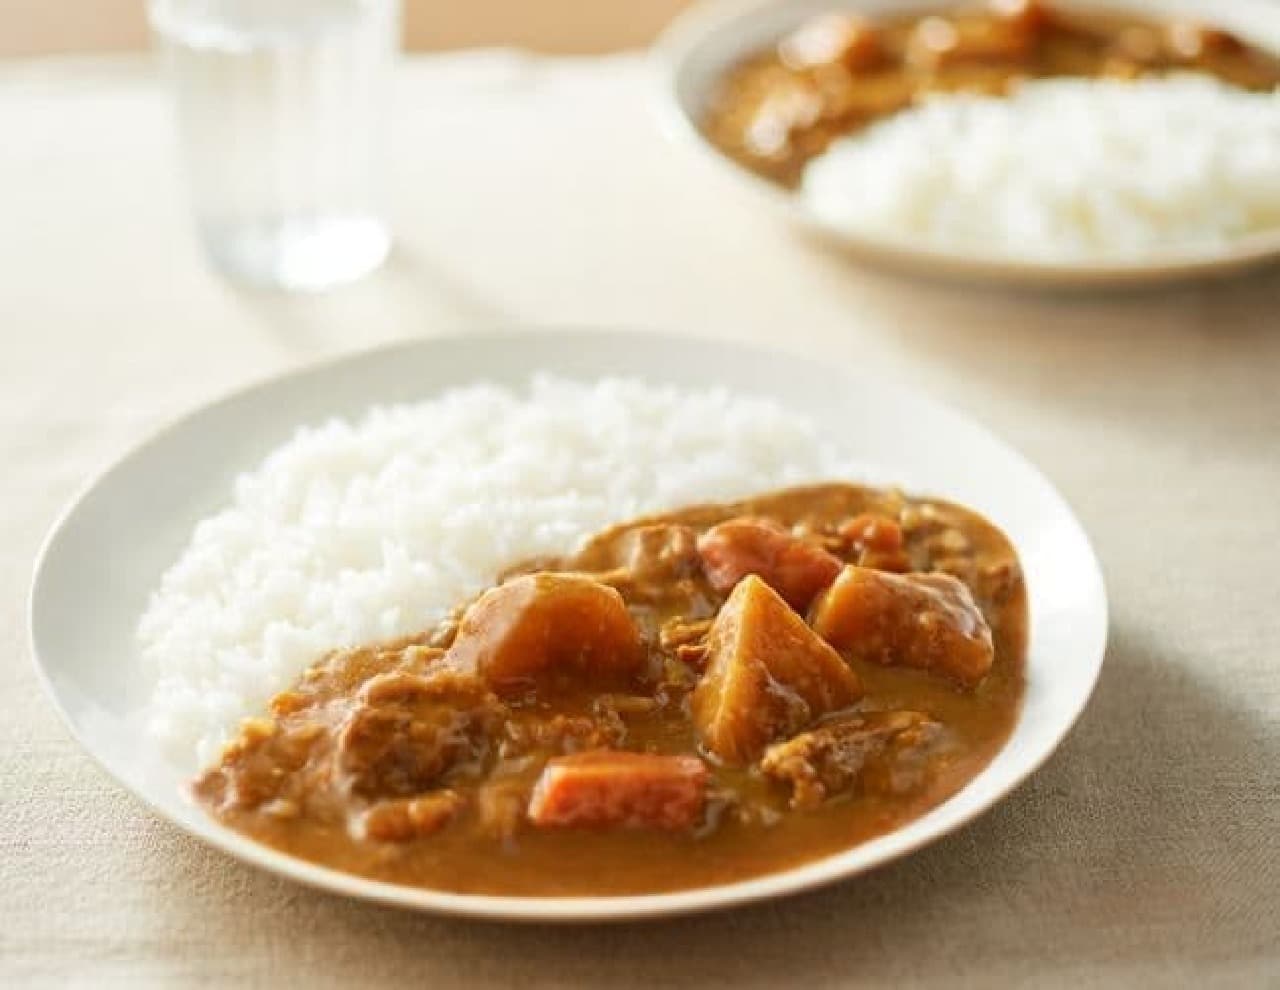 MUJI "Our specialty beef curry that makes the best use of the ingredients"